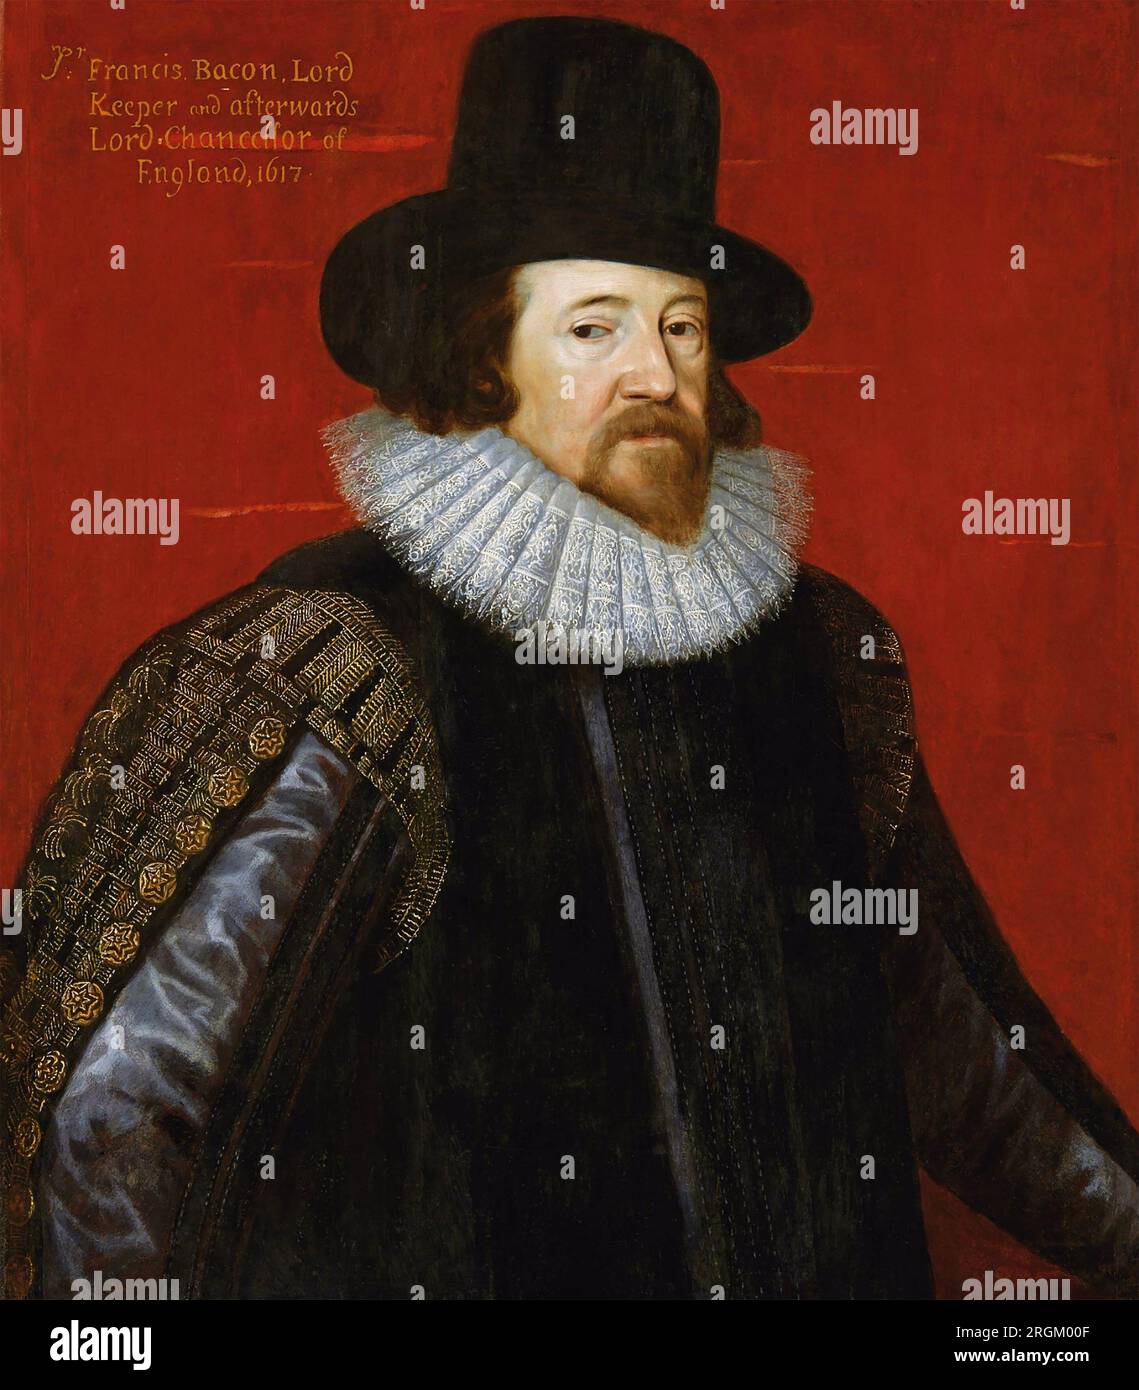 FRANCIS BACON  (1561-1626)  English statesman and philosopher in the 1617 painting by Paul van Somer Stock Photo